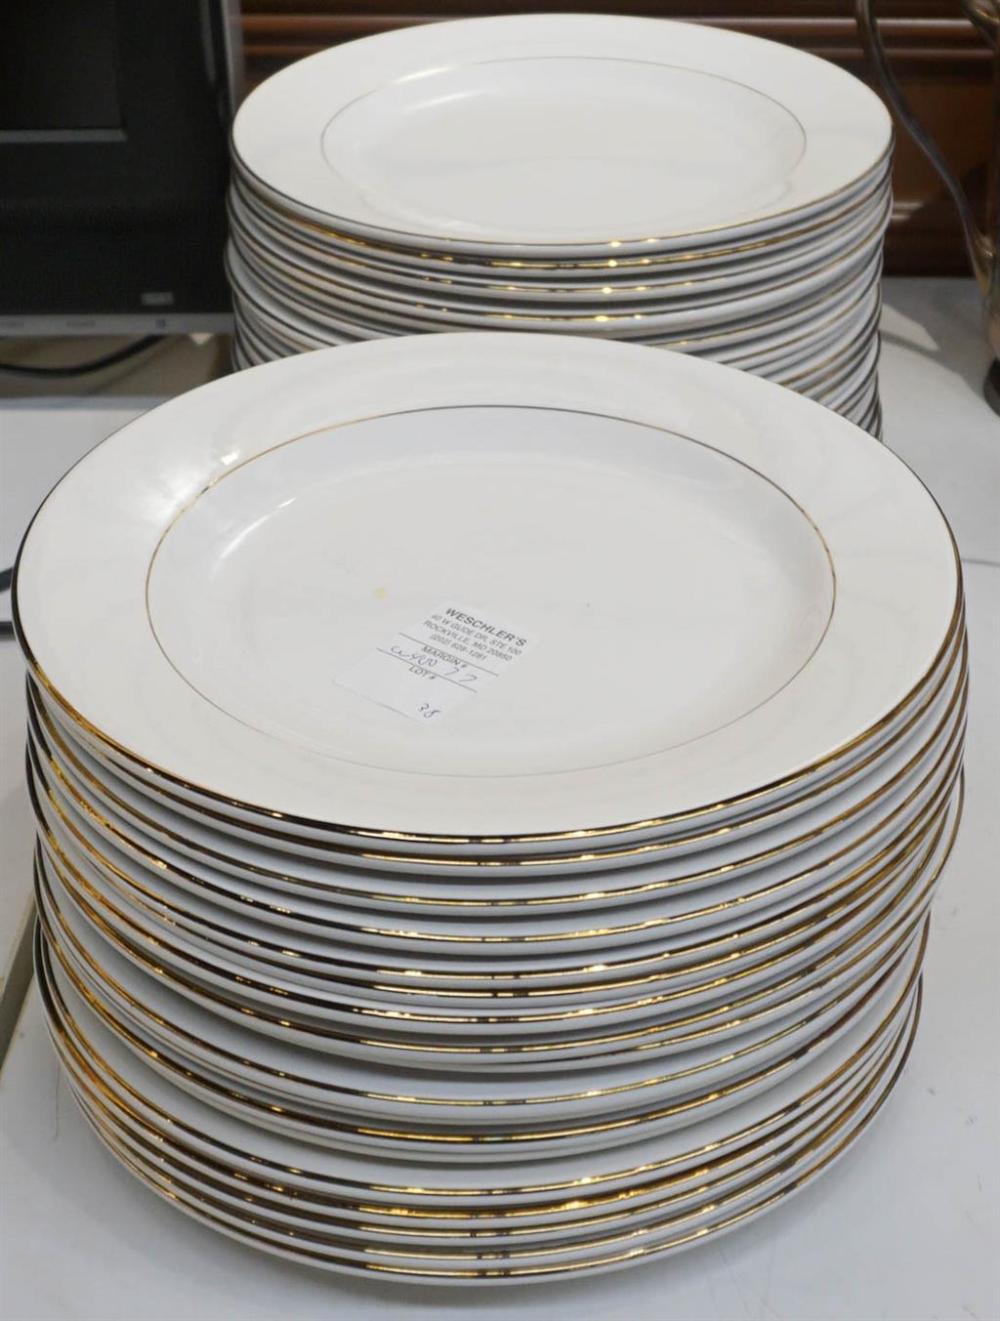 THIRTY-EIGHT BANQUET WARE BY ADAMS